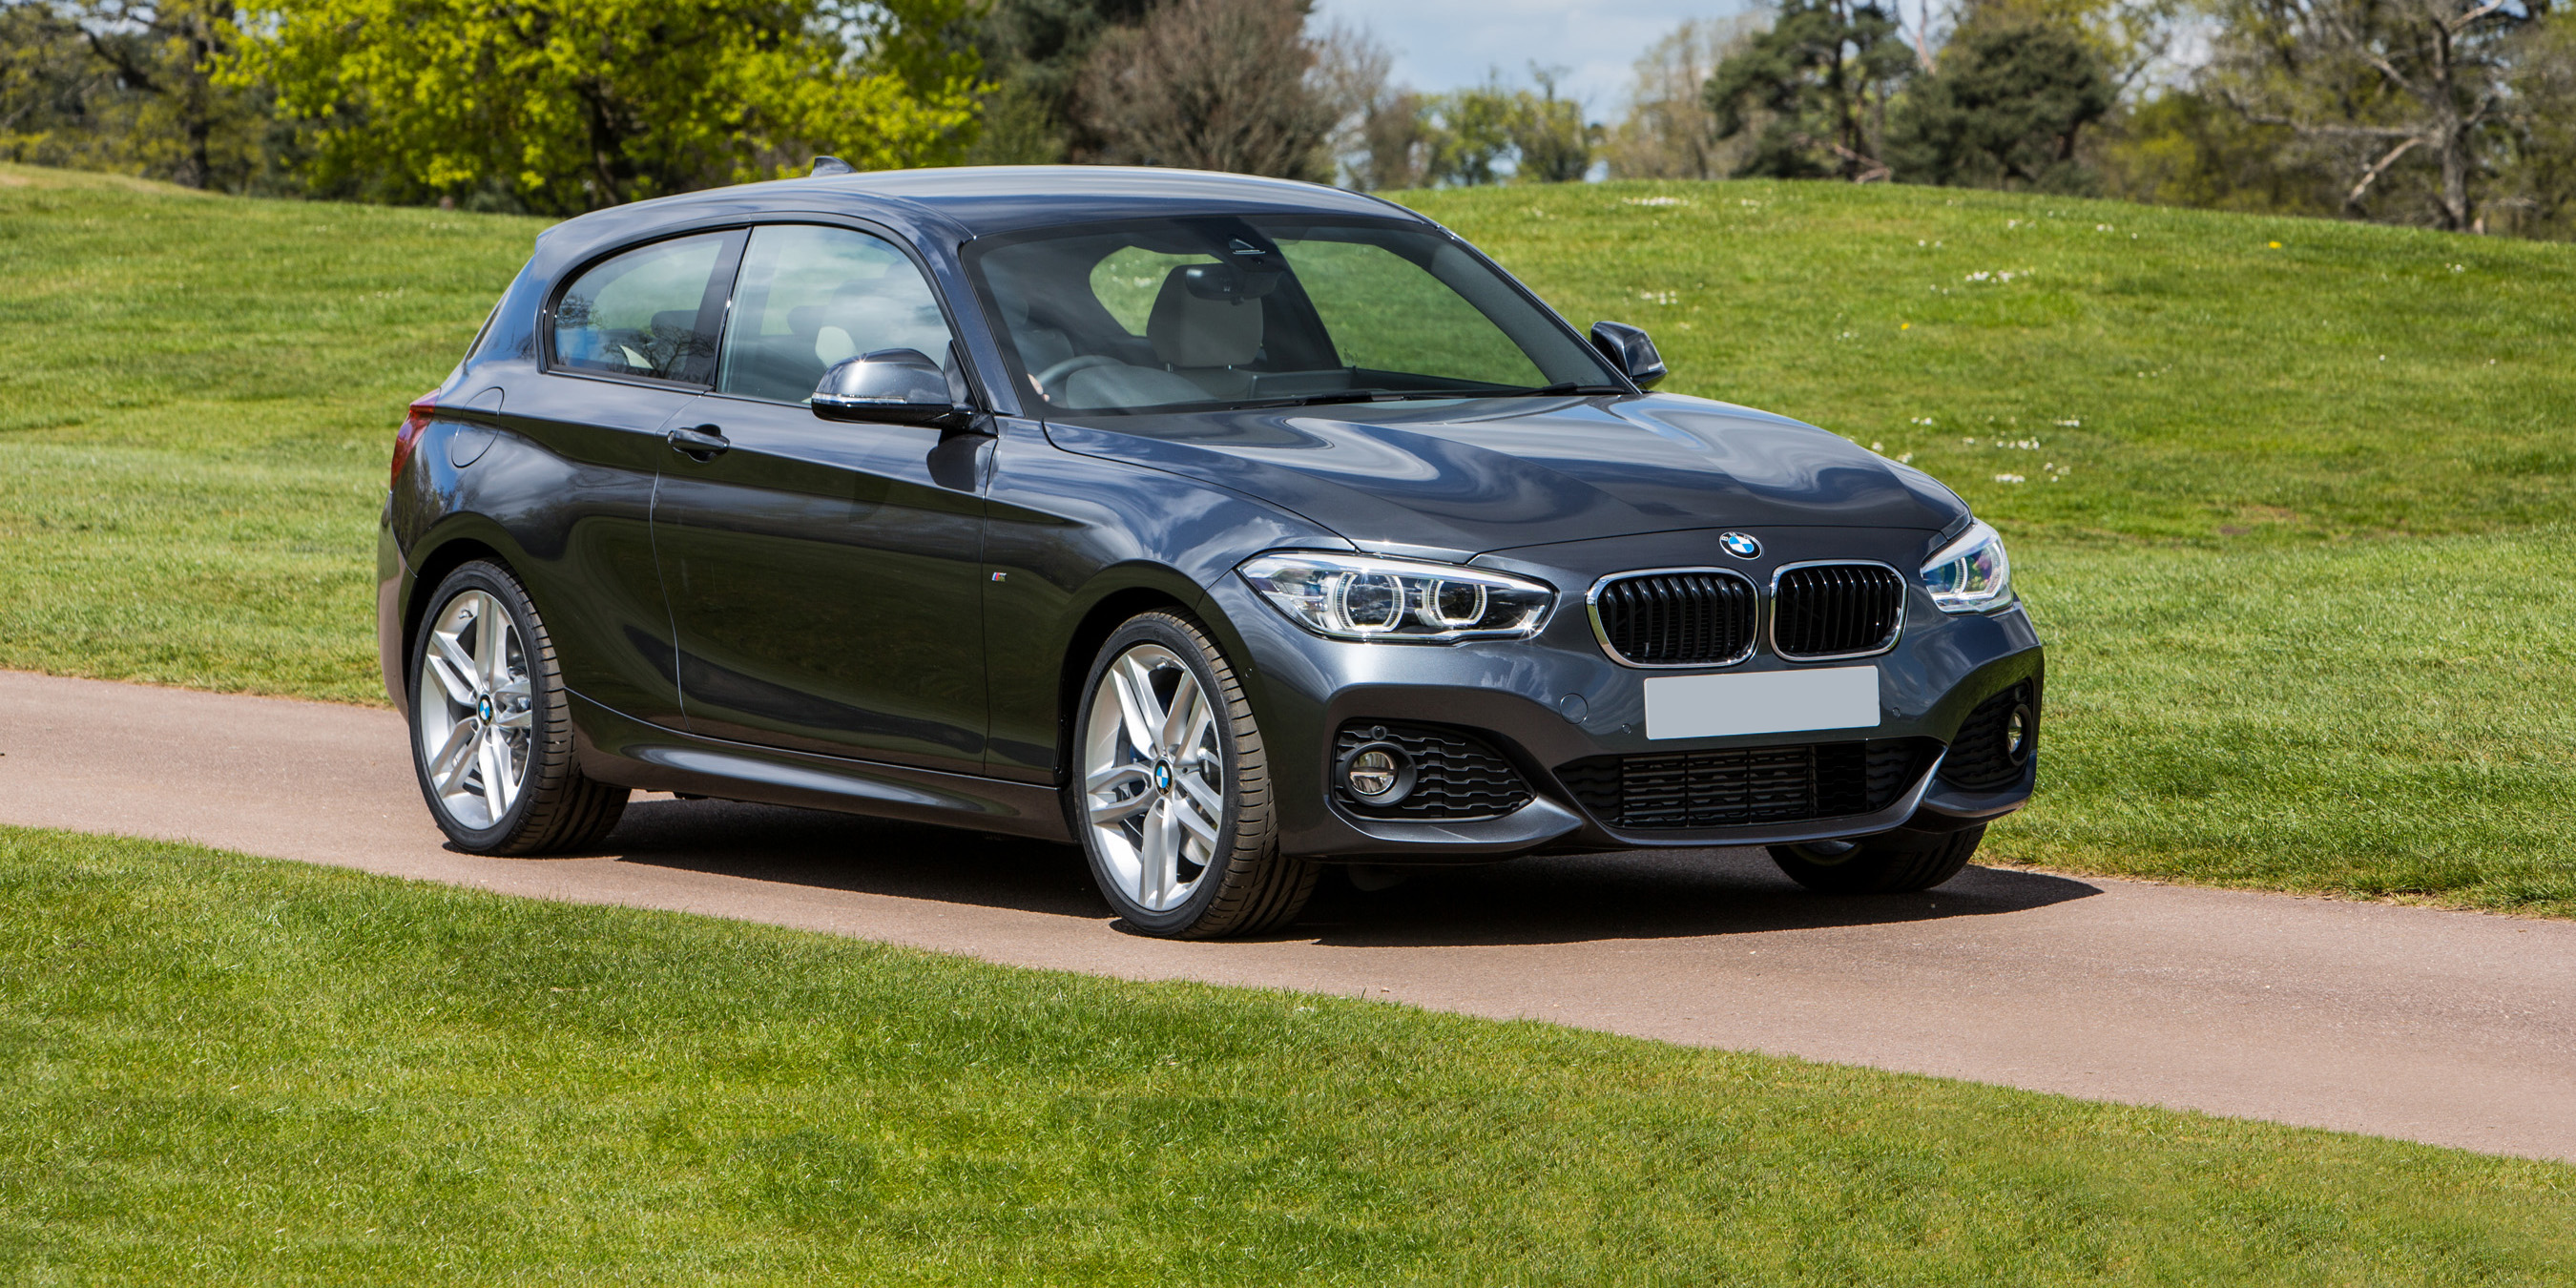 New Bmw 1 Series 15 19 Review Carwow